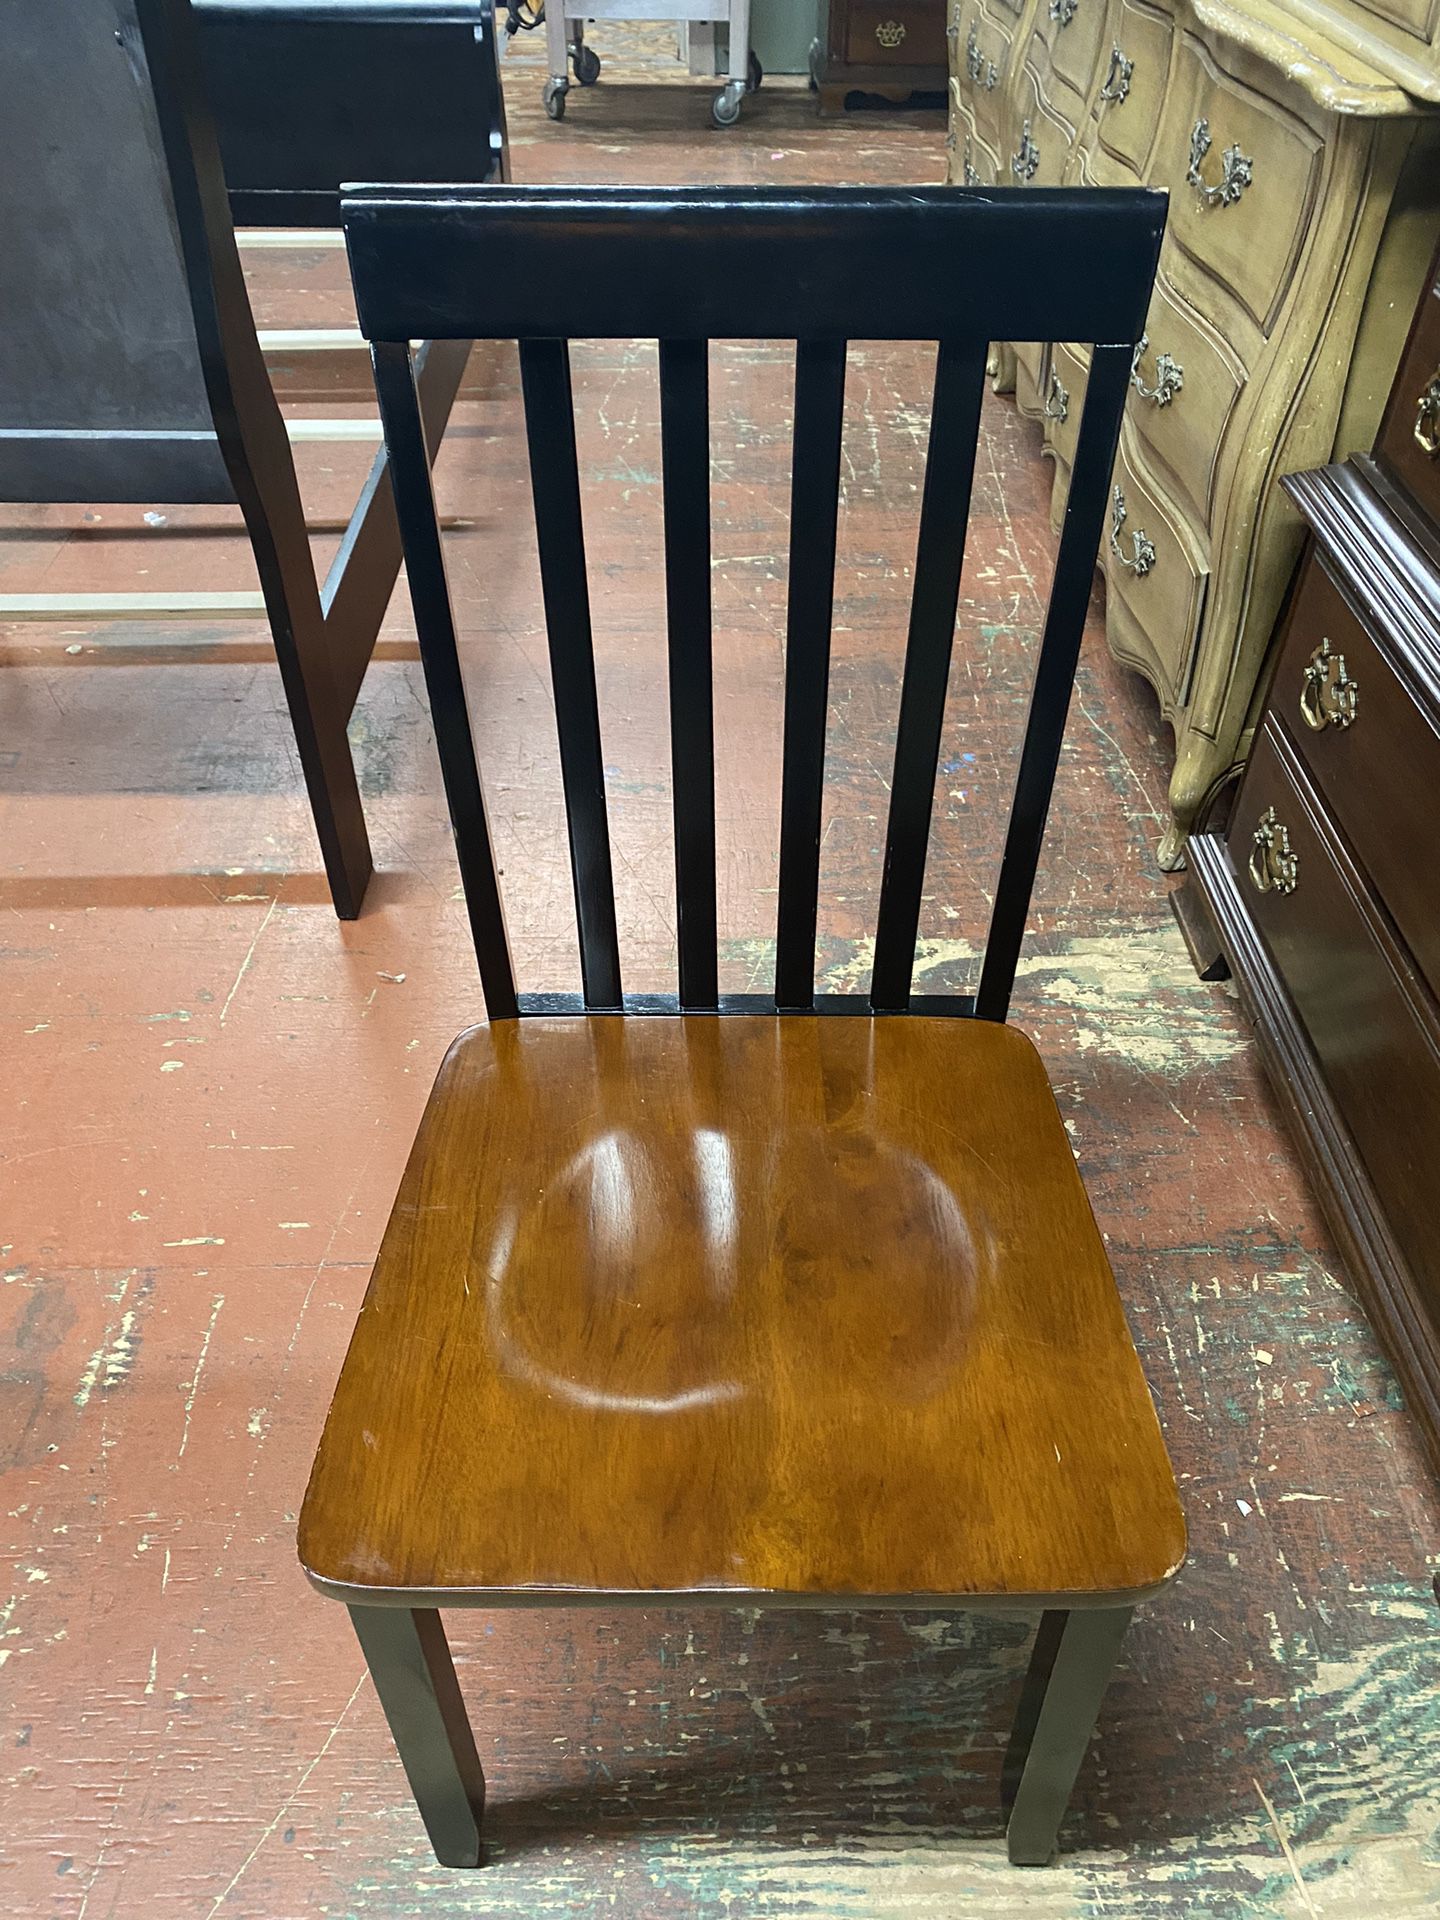 Set of 6 Black & Brown Wooden Dining Table Chairs $7 each or $35 for Set